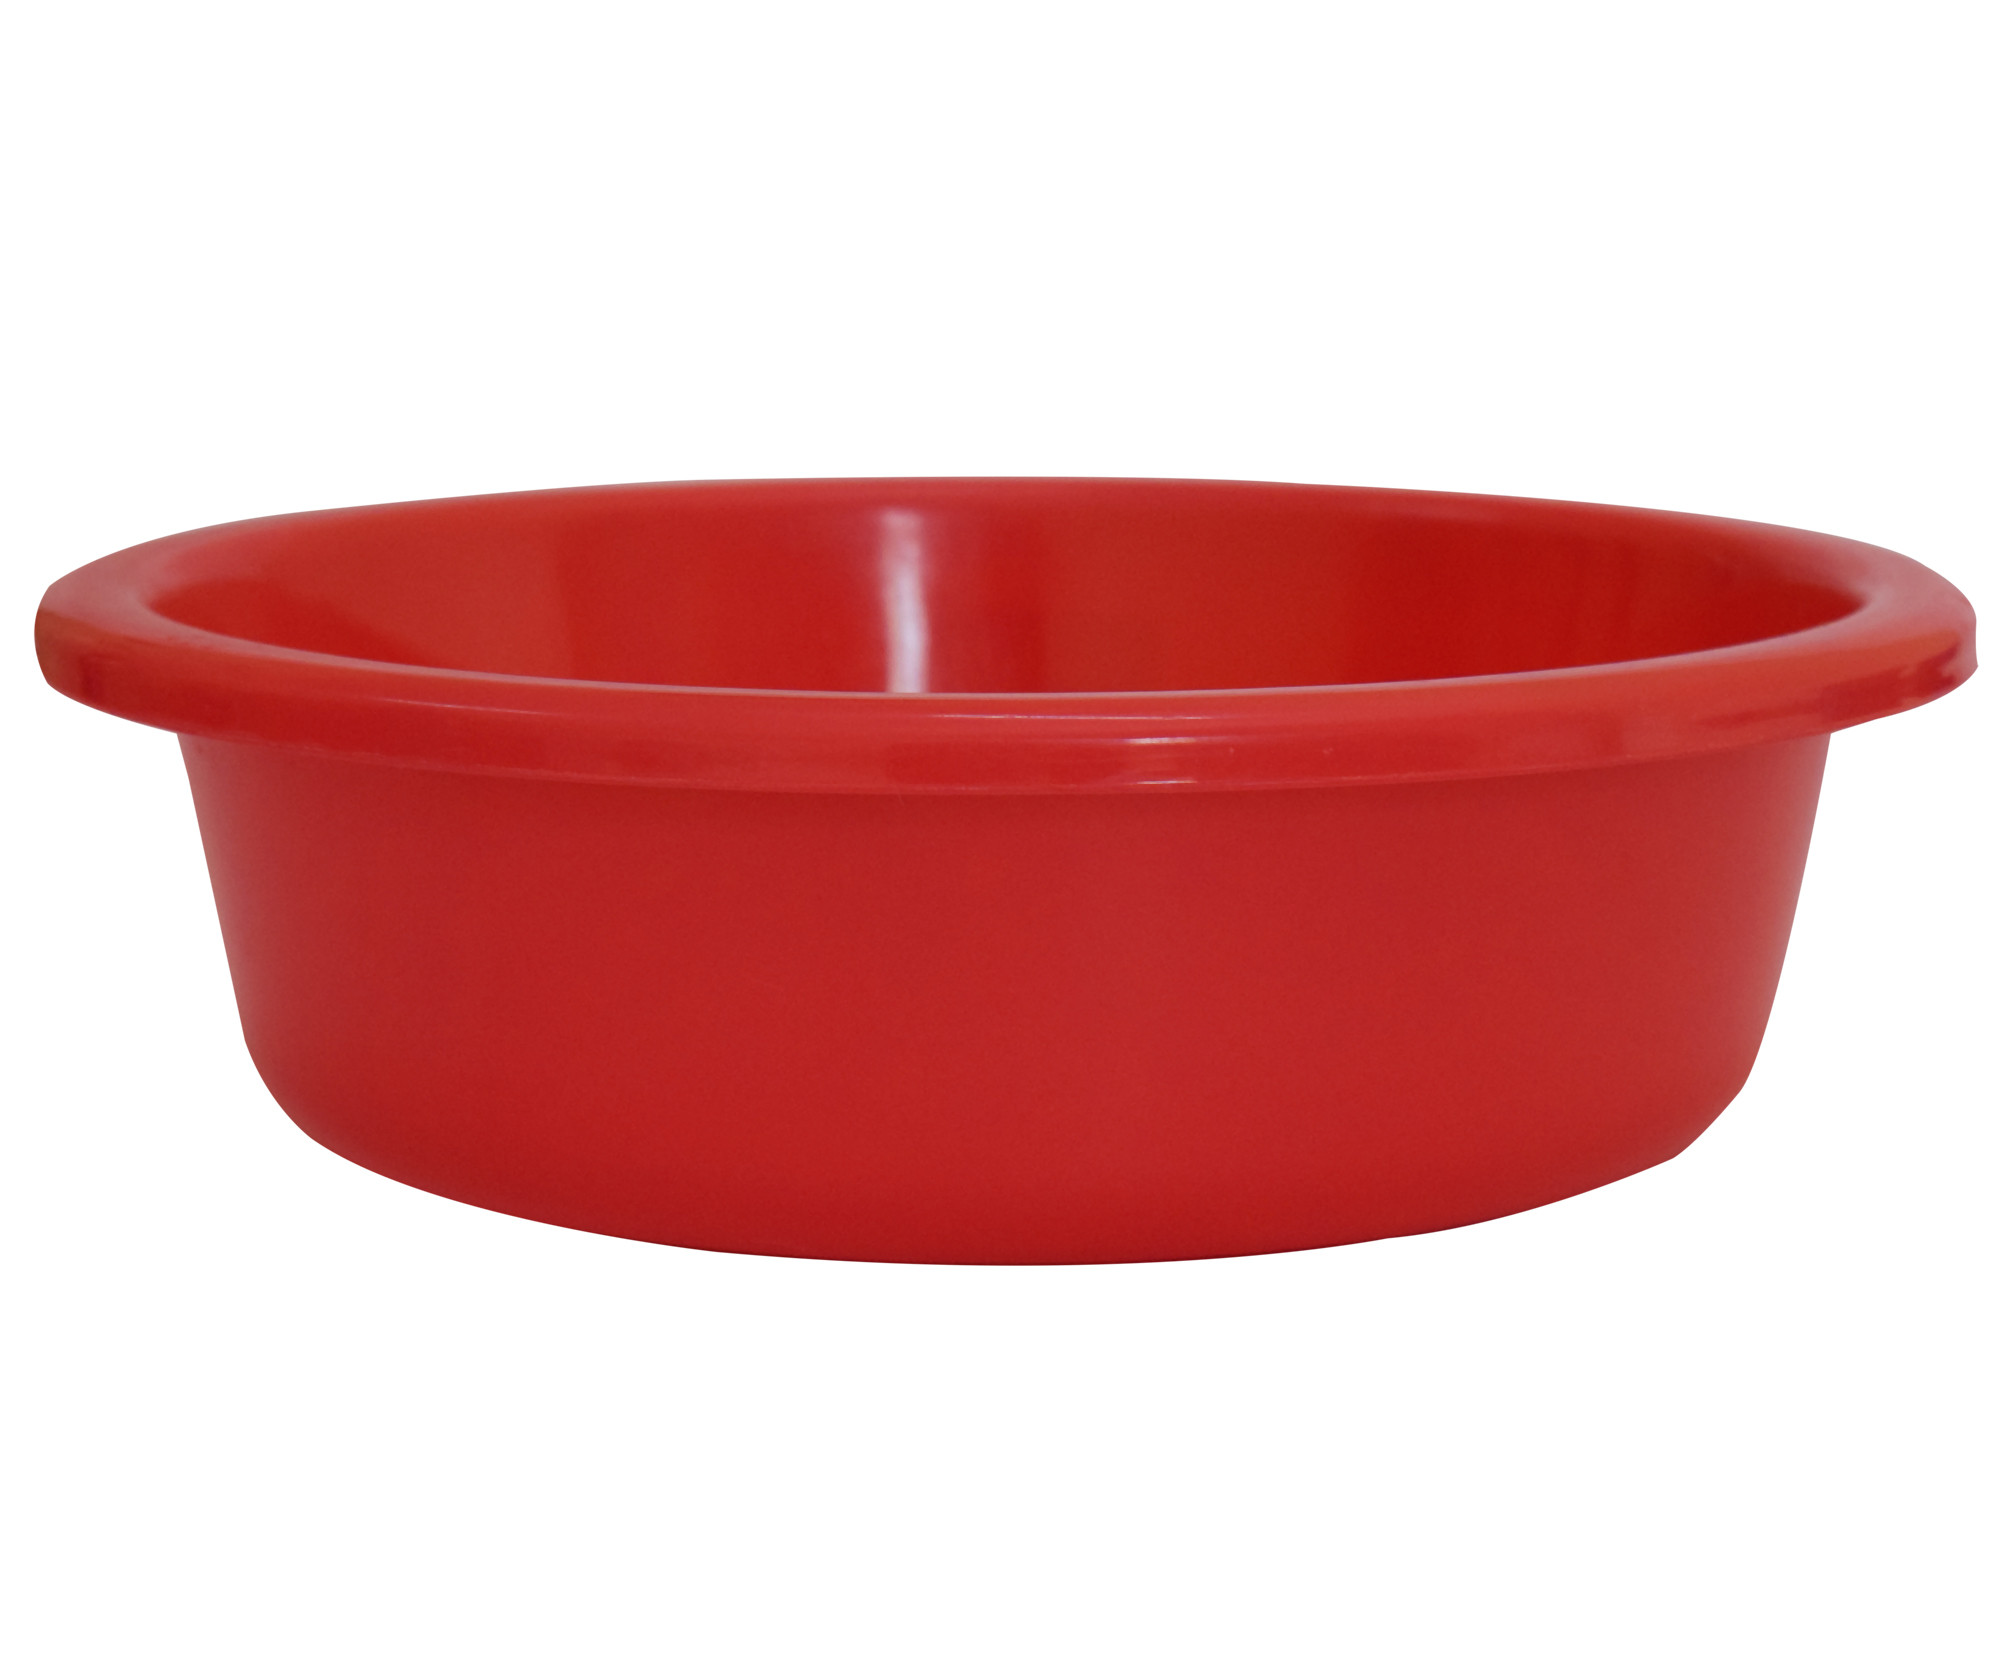 Kuber Industries Multiuses Unbreakable Plastic Knead Dough Basket/Basin Bowl For Home & Kitchen 6 Ltr- Pack of 2 (Red & Light Pink)